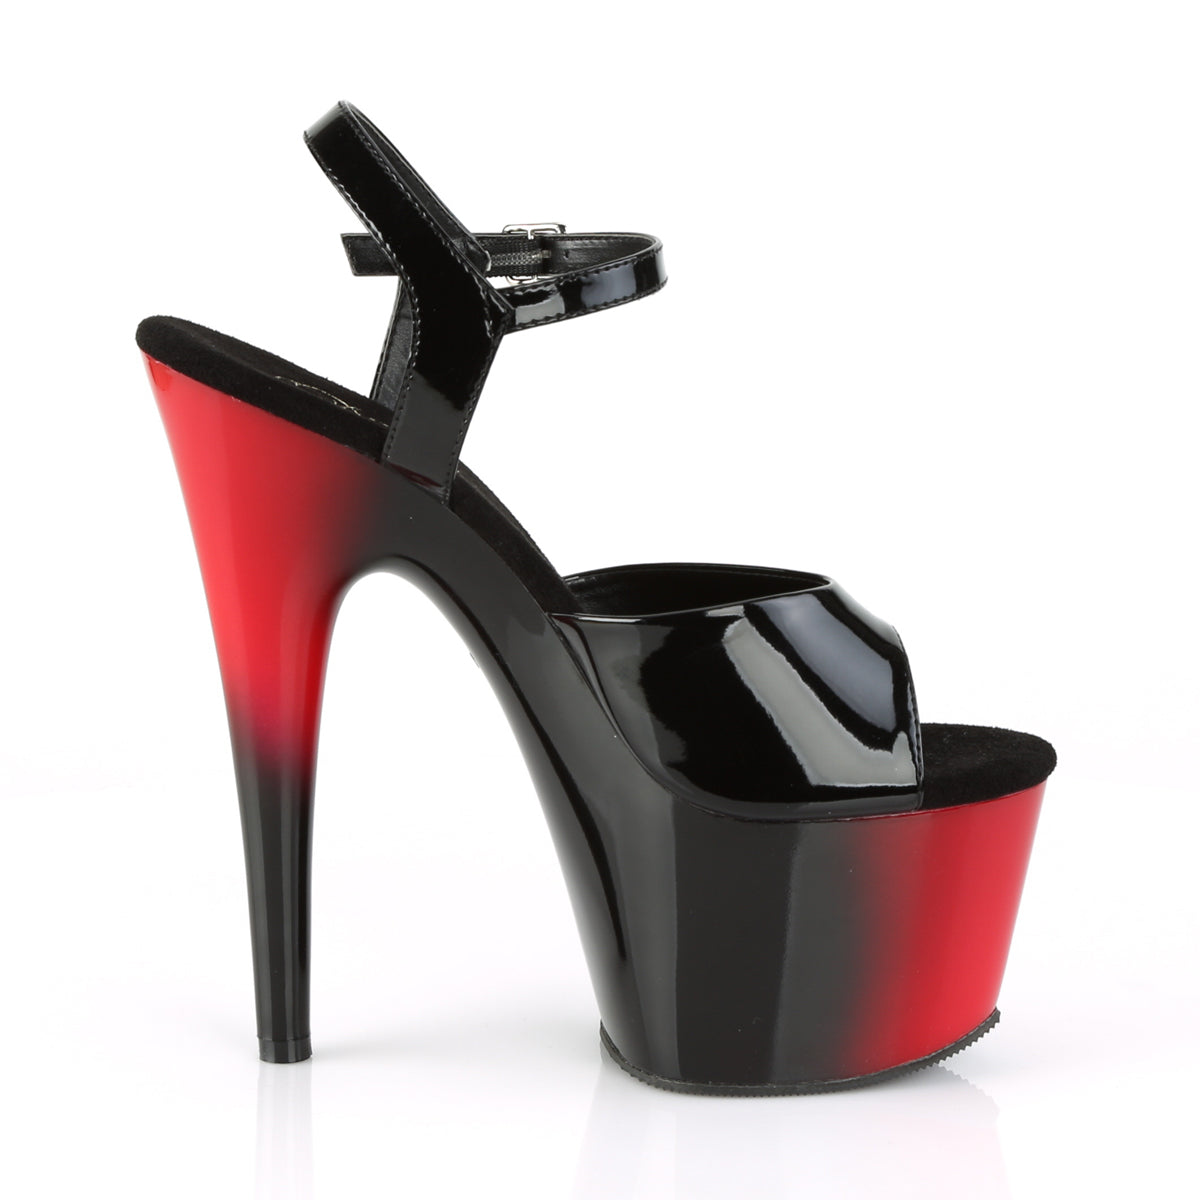 ADORE-709BR Pleaser 7" Heel Black and Red Pole Dancing Shoes-Pleaser- Sexy Shoes Fetish Heels